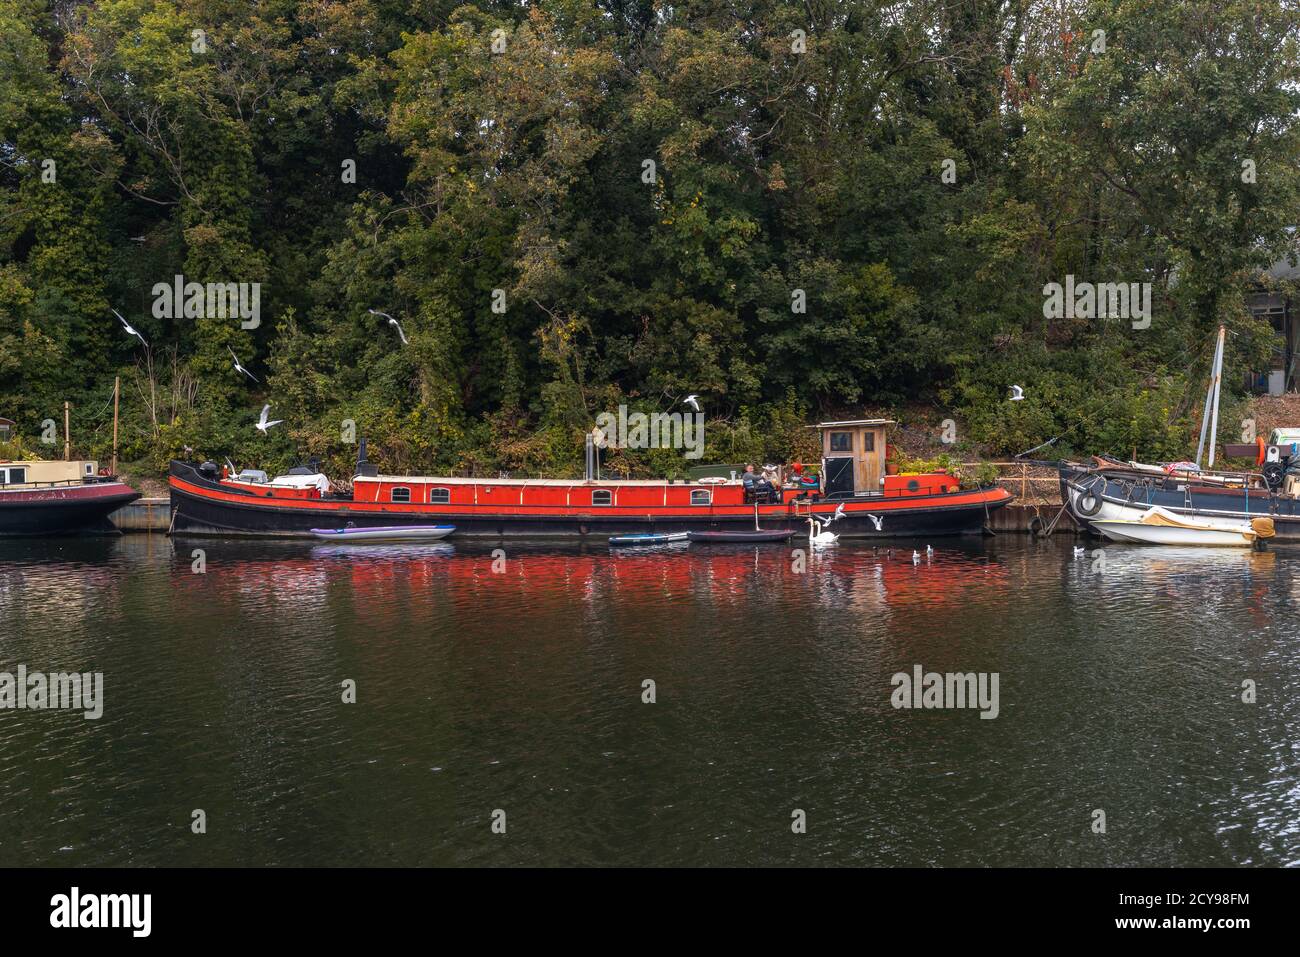 Red houseboat / barge moored on Platt's Eyot island along the Thames river in Hampton in West London, London, England, UK Stock Photo